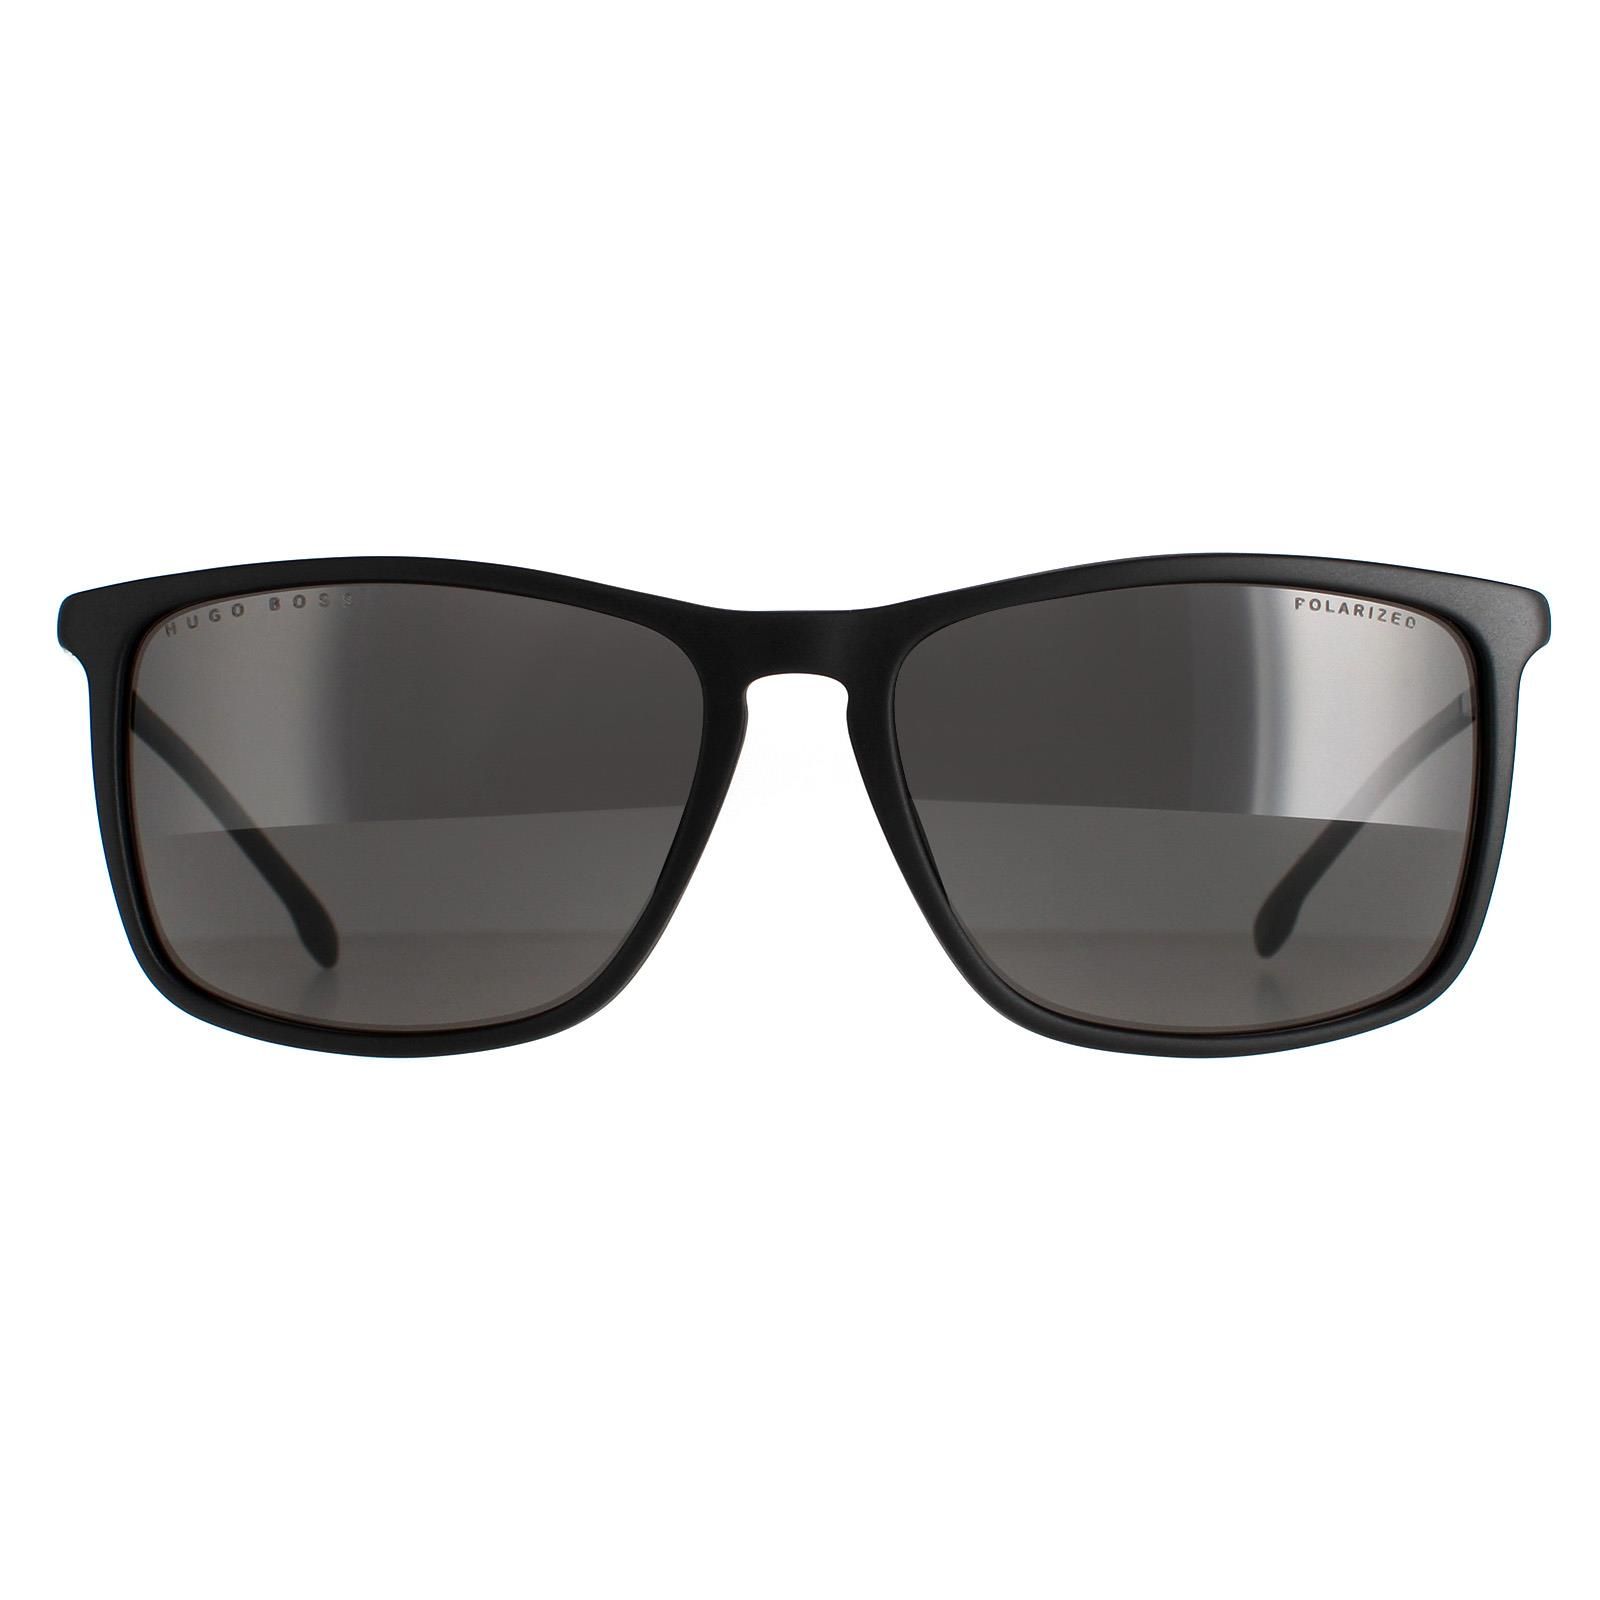 Hugo Boss Rectangle Mens Matte Black Grey Polarized BOSS 1182/S/IT  Hugo Boss are a masculine design with a super slim rectangular frame. Crafted in Italy from lightweight plastic they're comfortable and durable with the Hugo Boss logo etched into the slender temples.